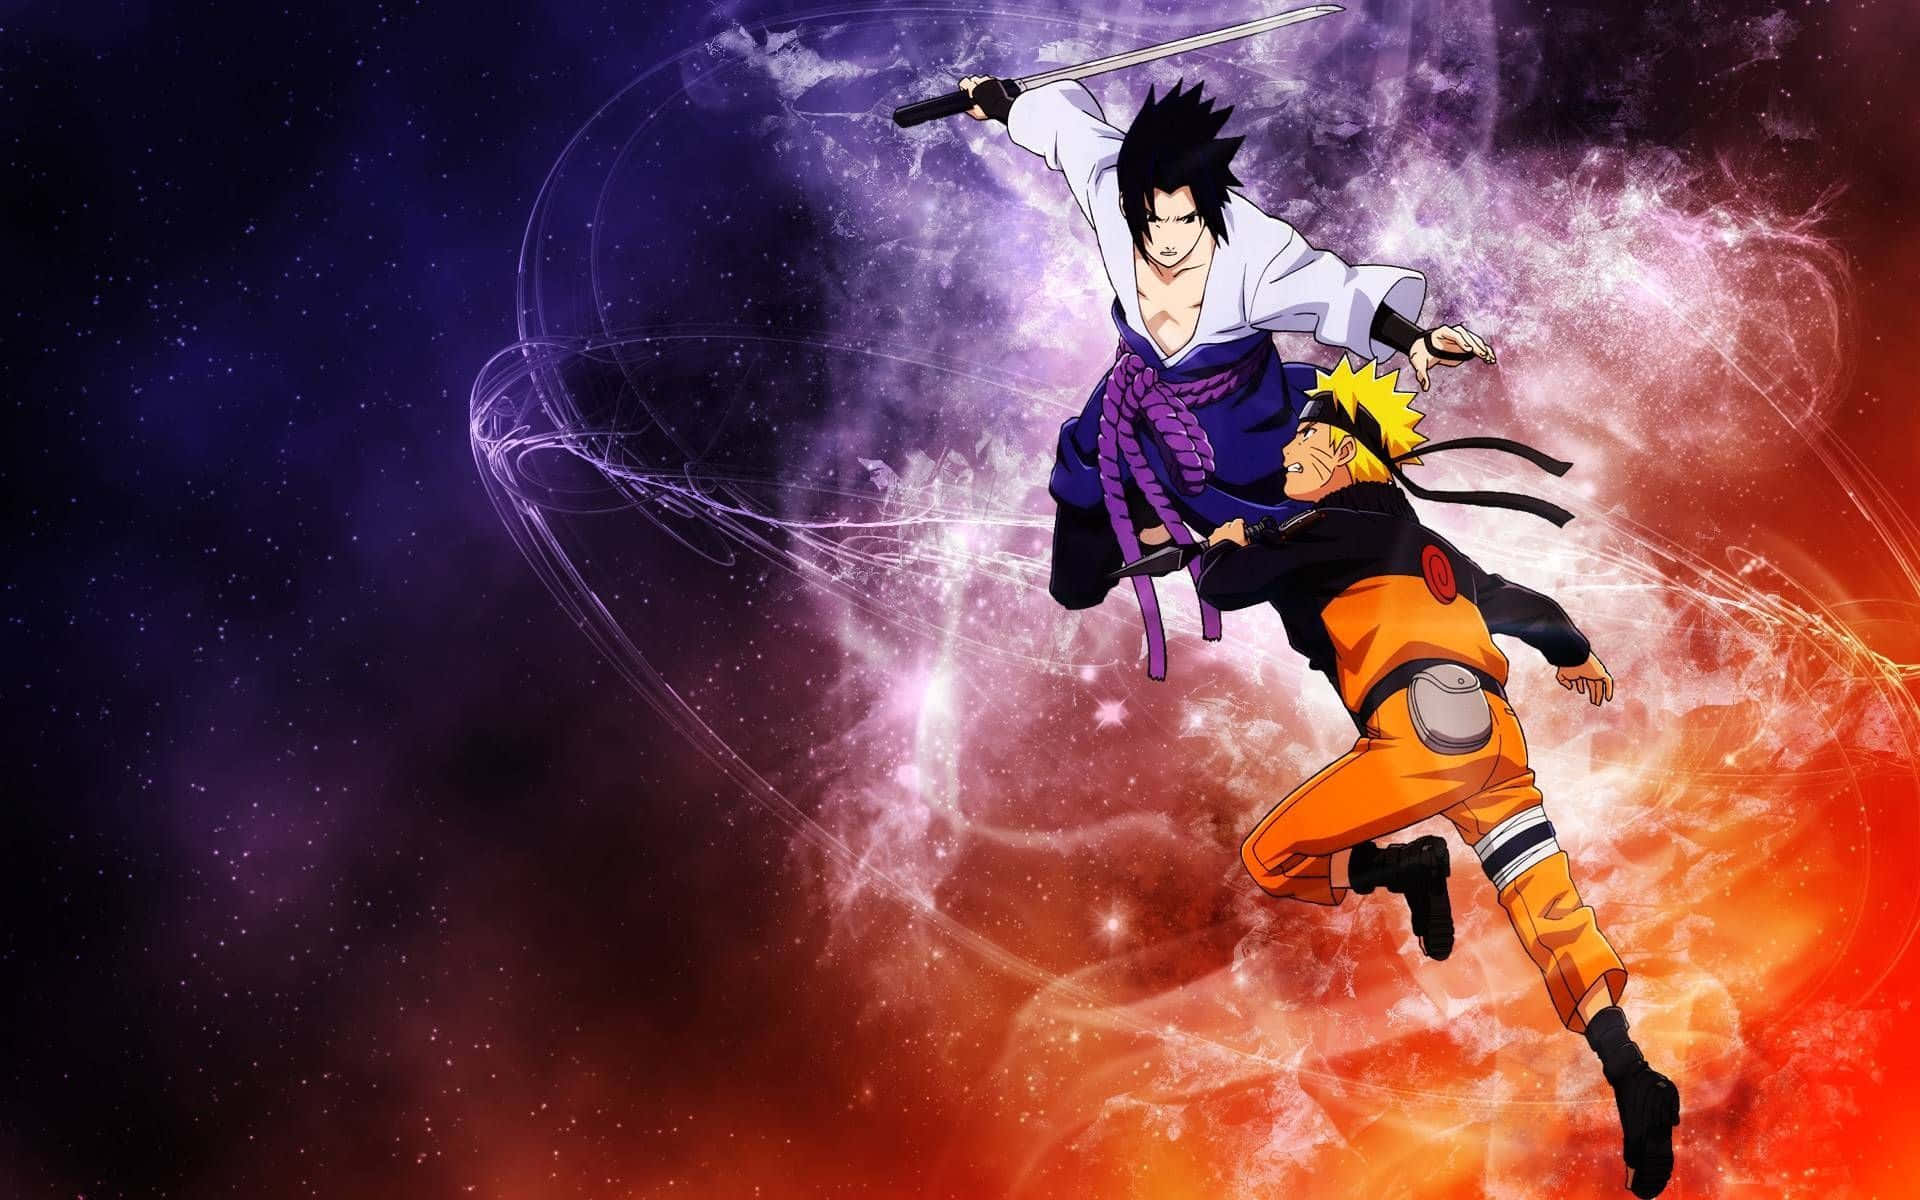 Unleash the power of the Ninja with Naruto on the PlayStation 4 Wallpaper